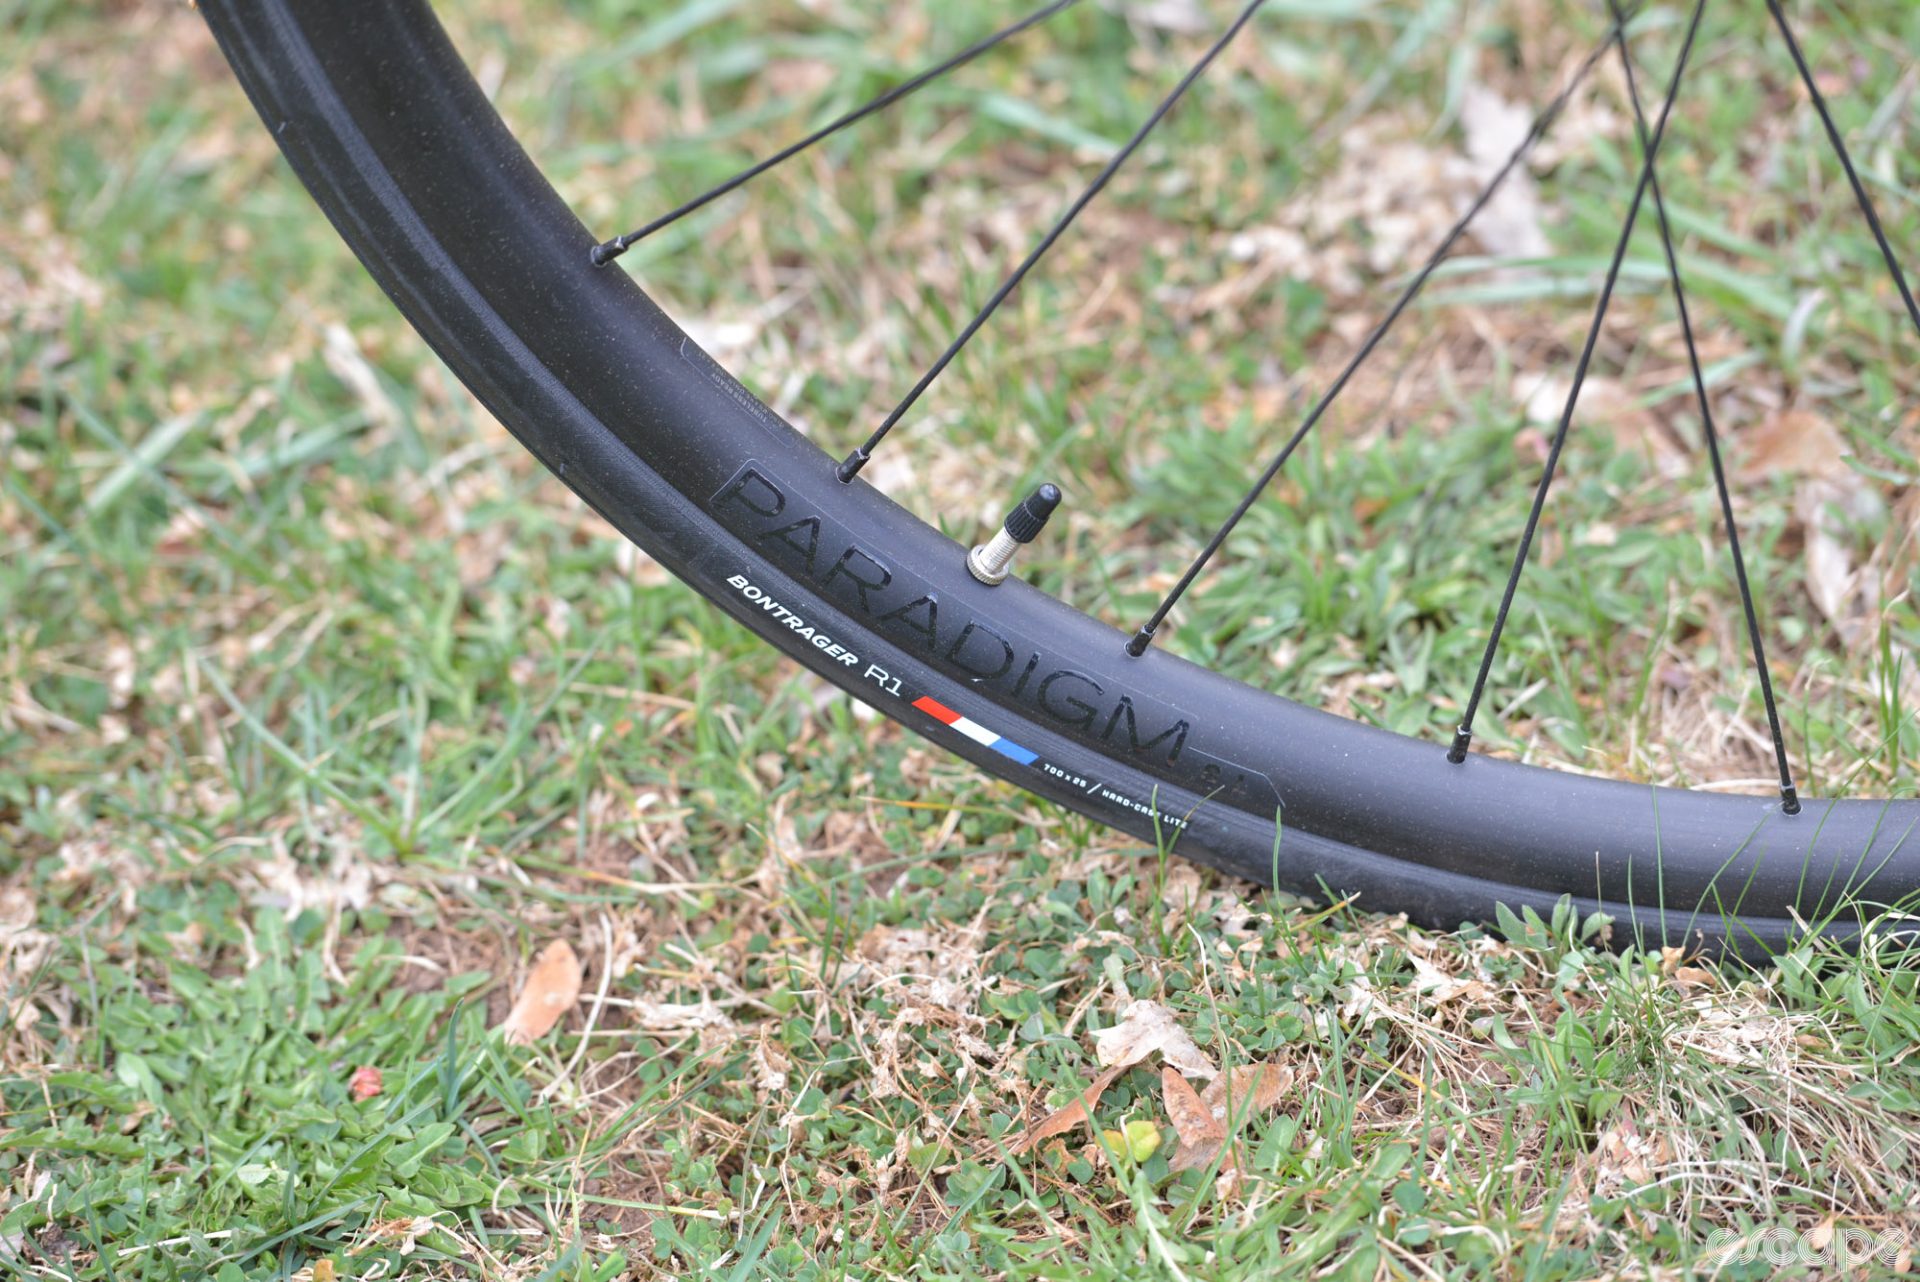 The Bontrager Paradigm aluminum rims and those awful, awful wirebead R1 Hardcase tires. 